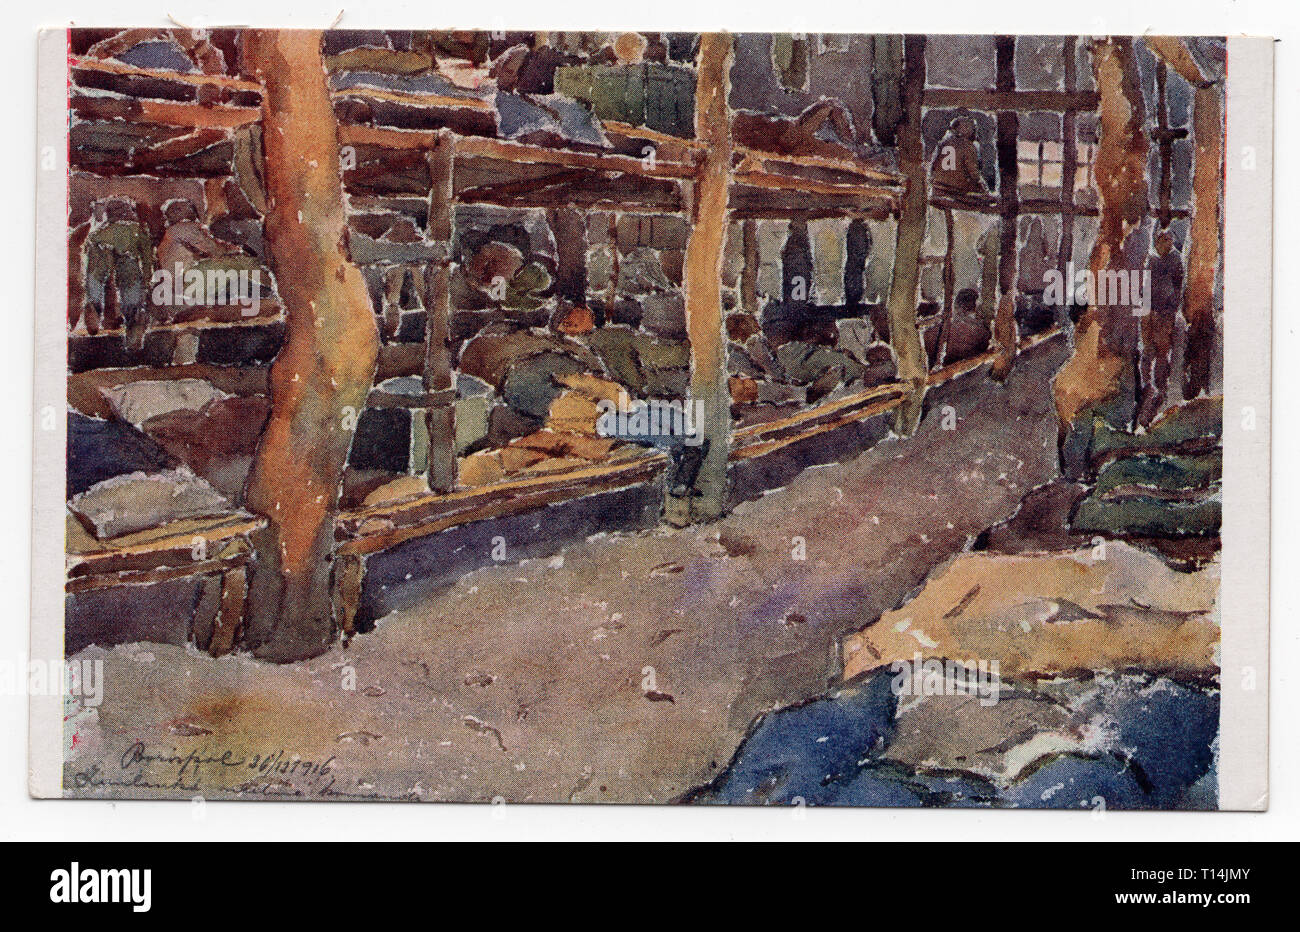 Czechoslovak soldiers in the underground barrack in the Borilspol Military Camp (now Boryspil in Ukraine, then in Russia) depicted in the watercolour painting by Czech artist Jan Matoušek painted on 26 December 1916 and printed on the Czechoslovak vintage postcard from the series 'Pictures from the life and fights of the Czechoslovak legions in Russia' ('Pohledy ze života a bojů československých legií v Rusku') issued in Czechoslovakia in the 1920s. Courtesy of the Azoor Postcard Collection. Stock Photo